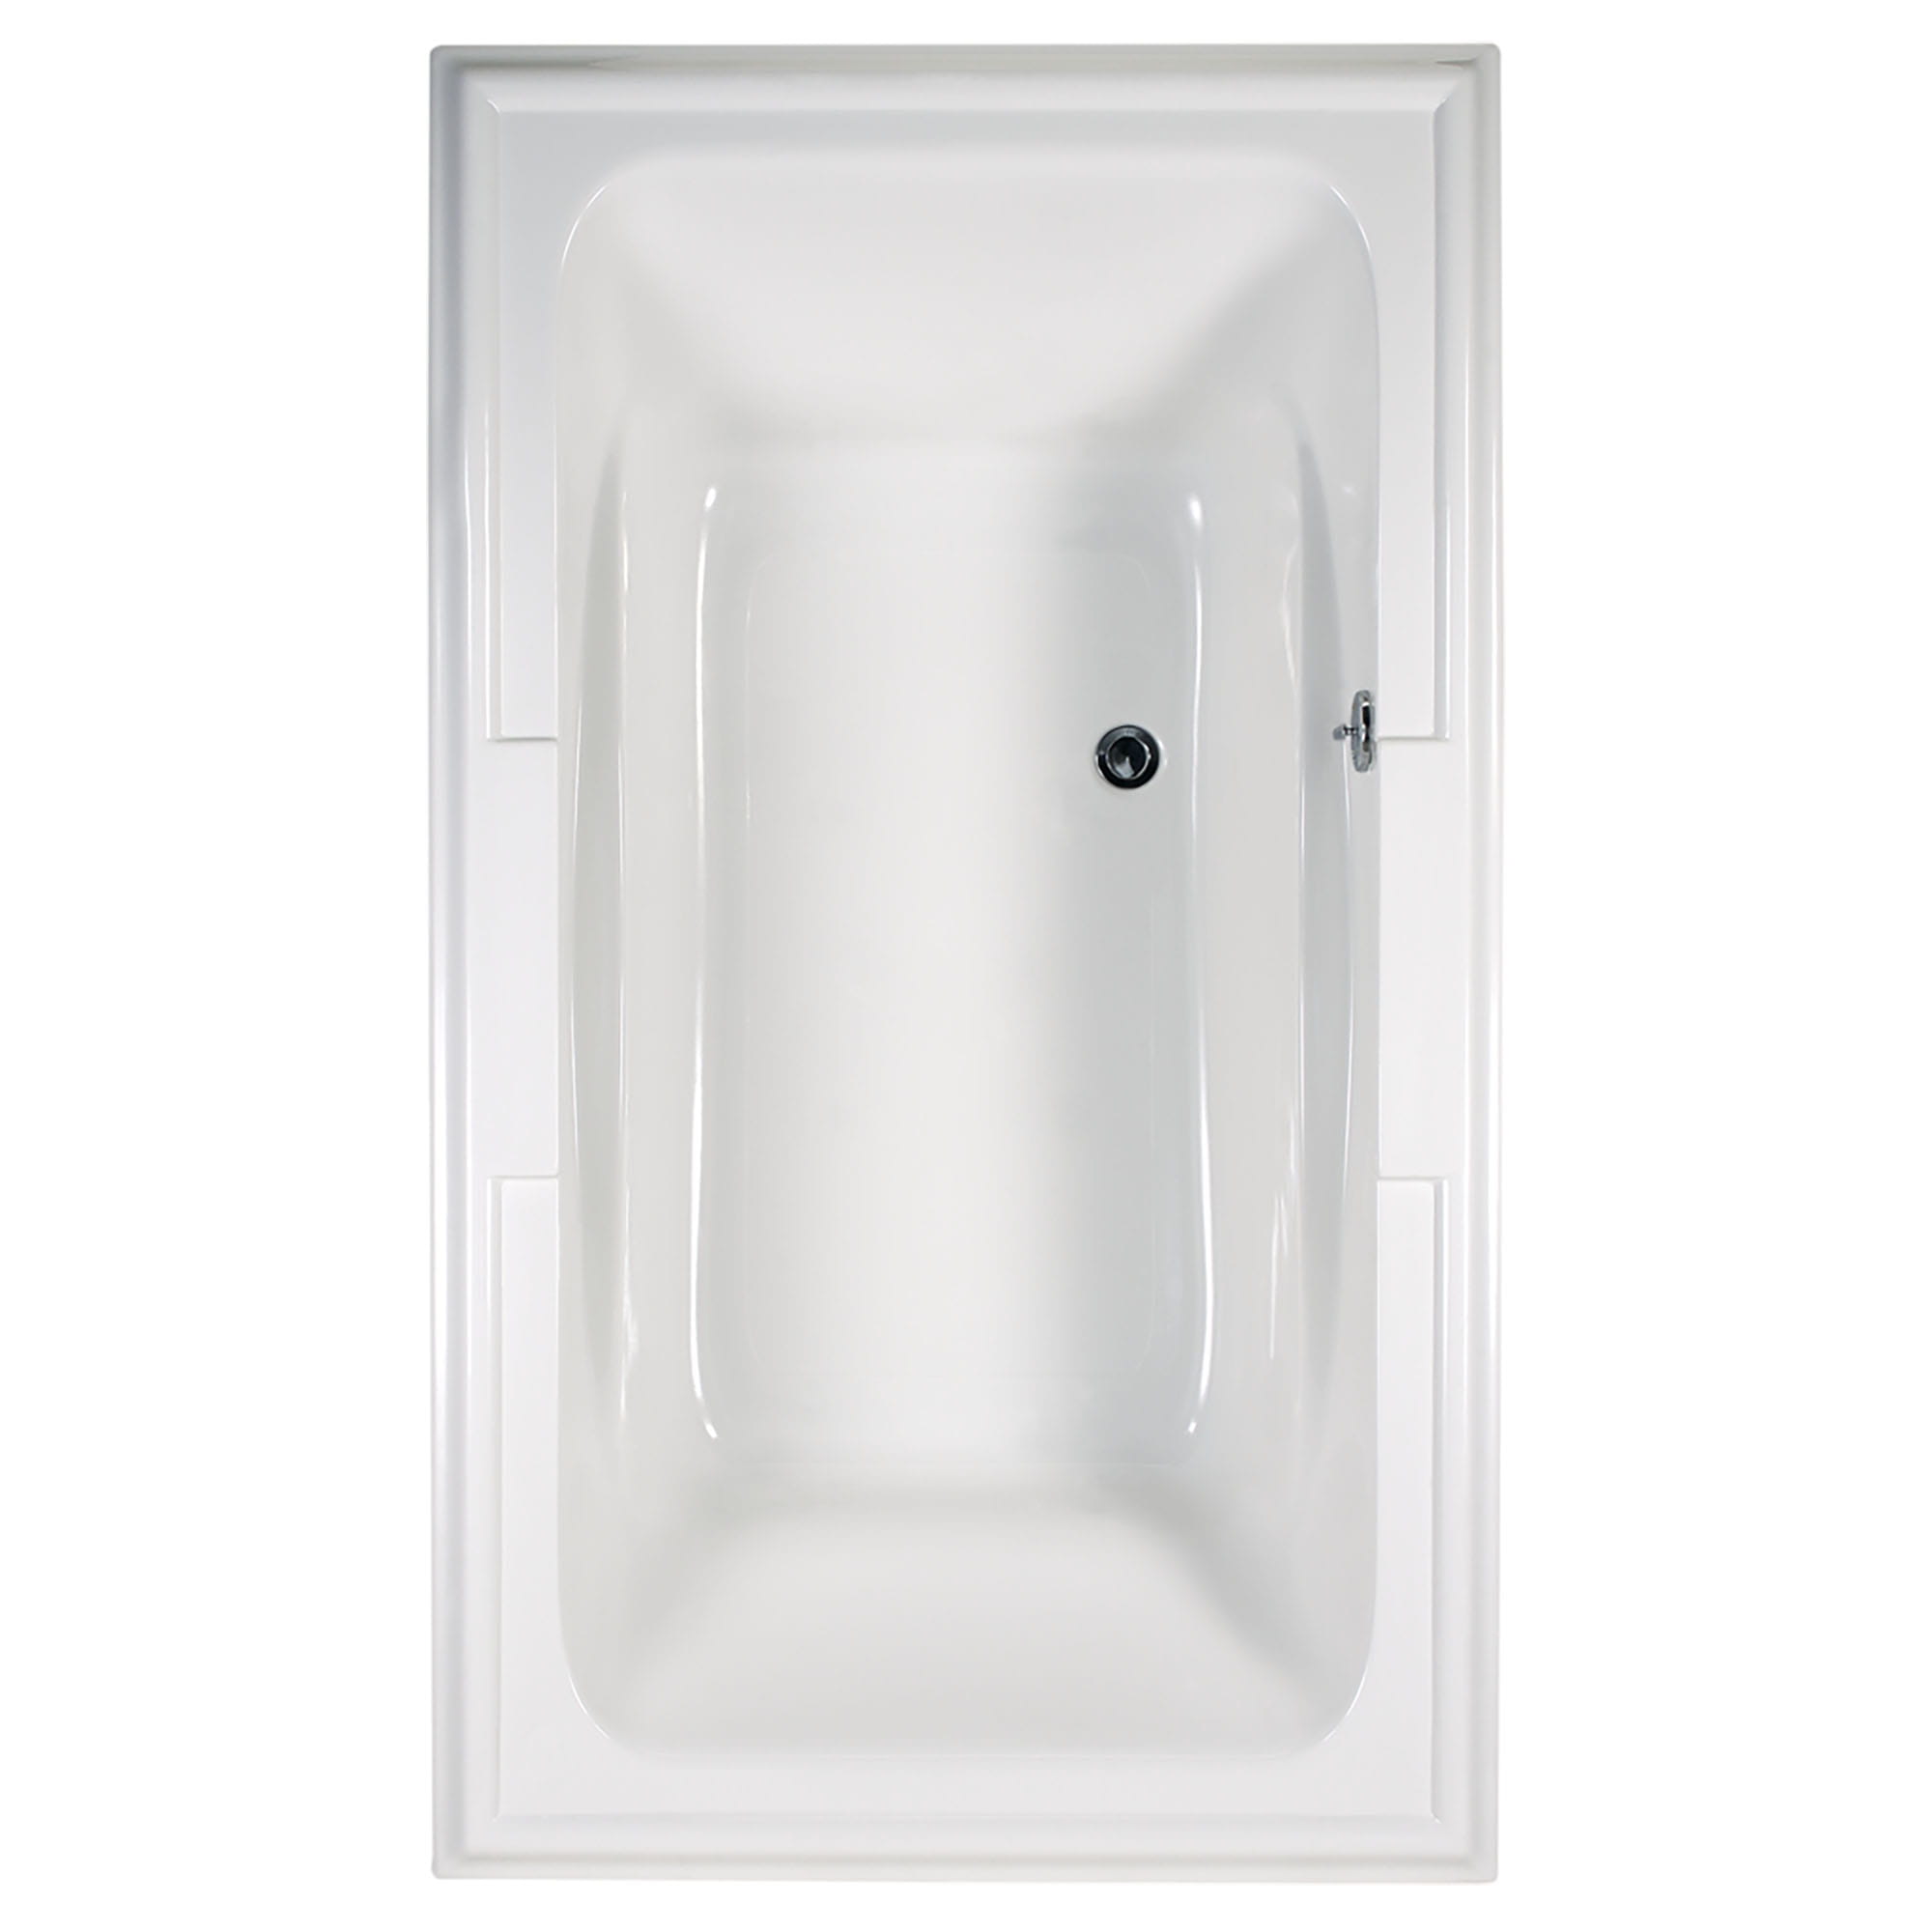 Town Square 60 x 42 Inch Drop In Bathtub With EcoSilent EverClean Hydromassage System WHITE